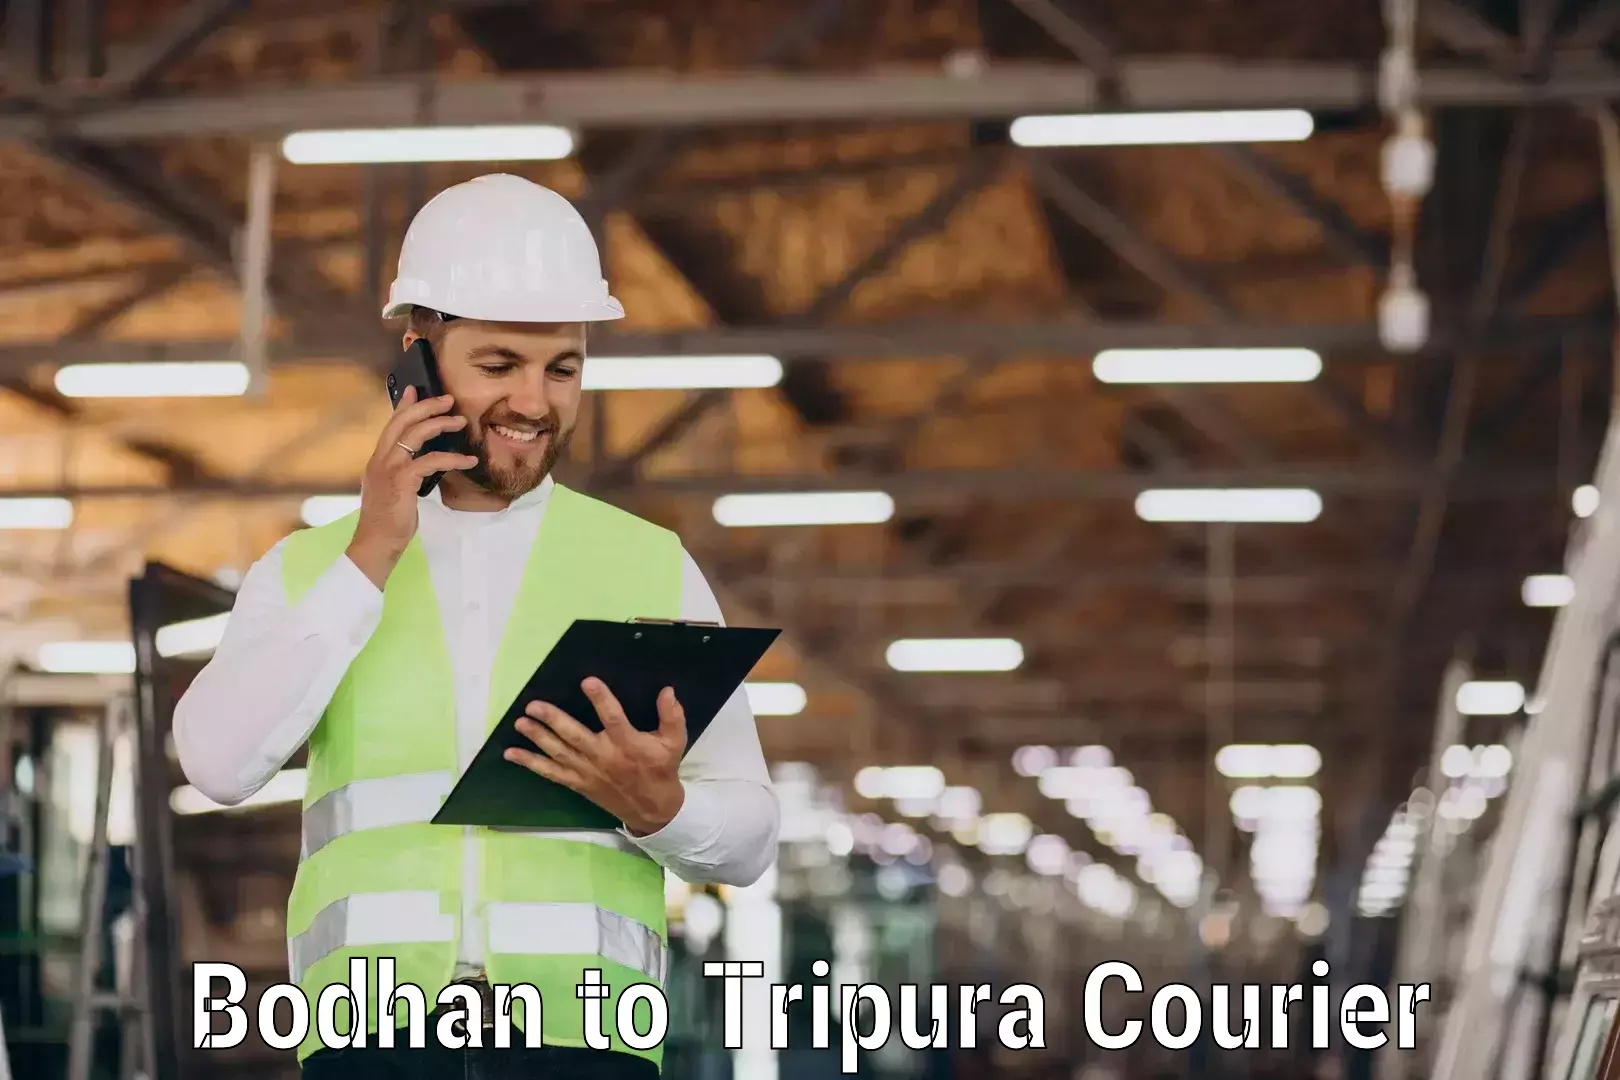 Advanced shipping services Bodhan to Udaipur Tripura